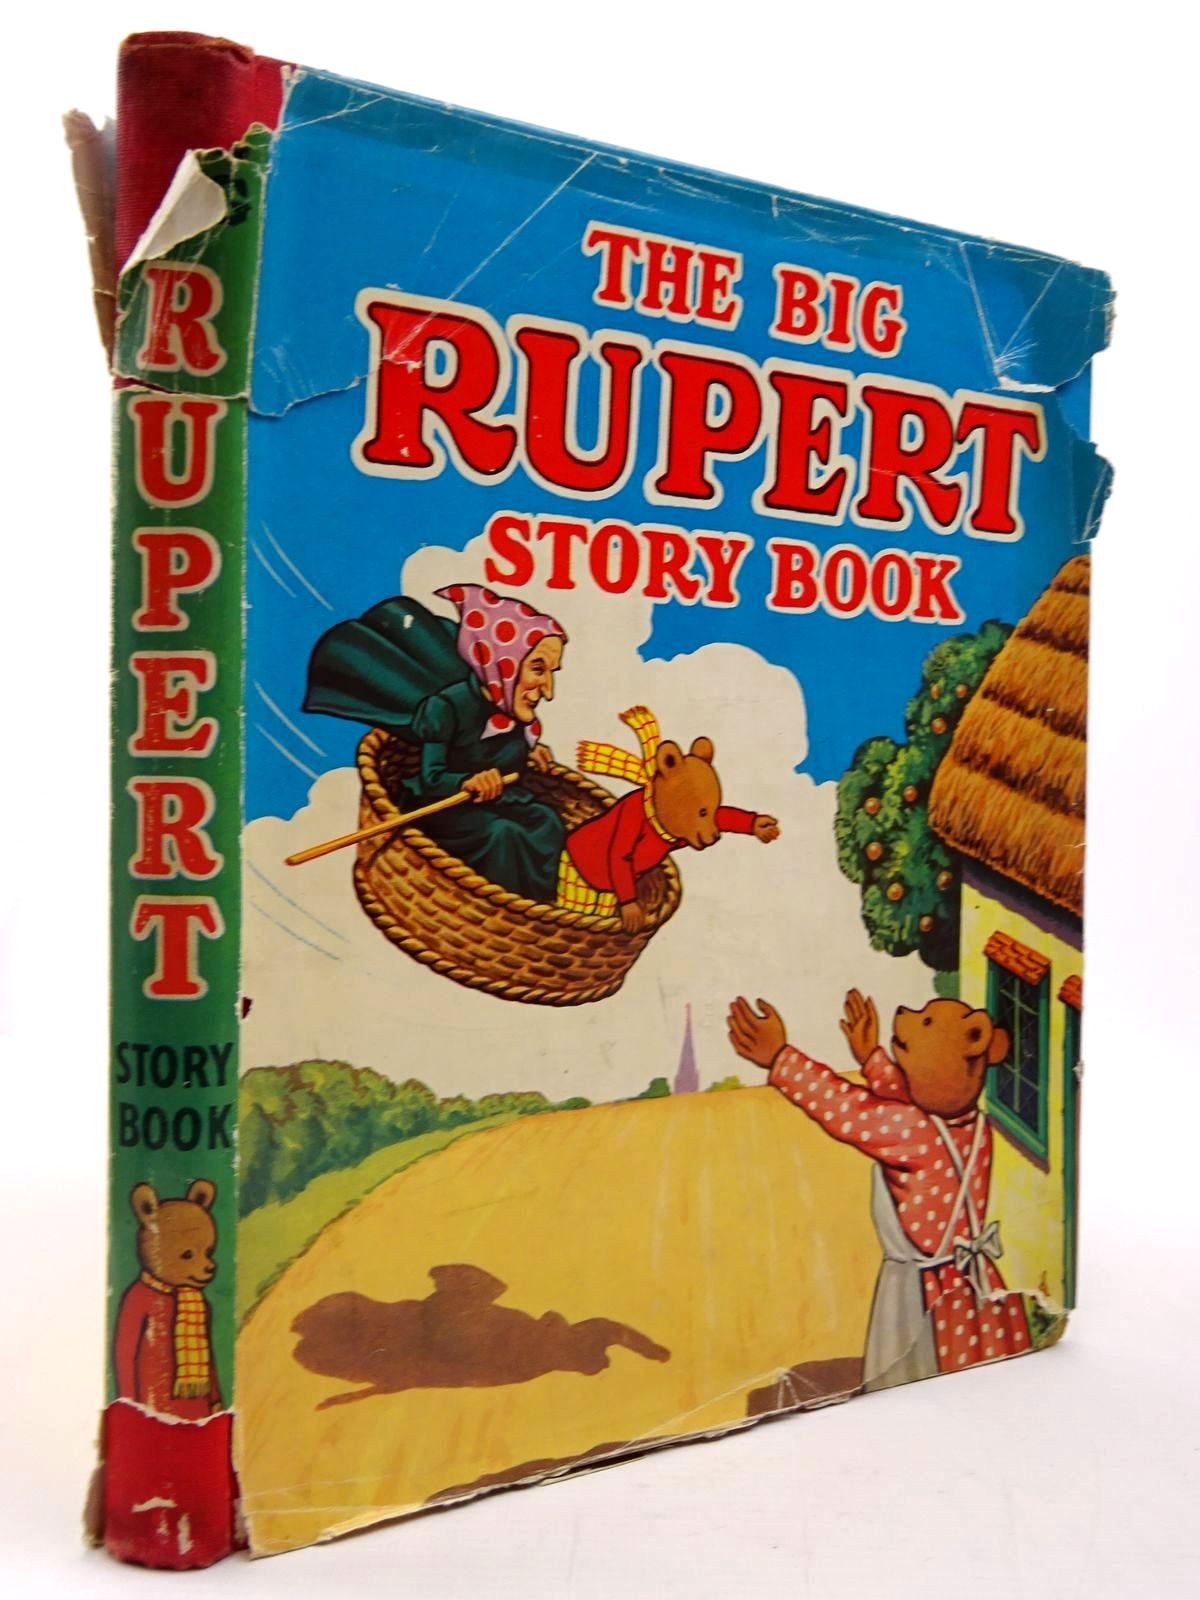 Cover of THE BIG RUPERT STORY BOOK by Mary Tourtel